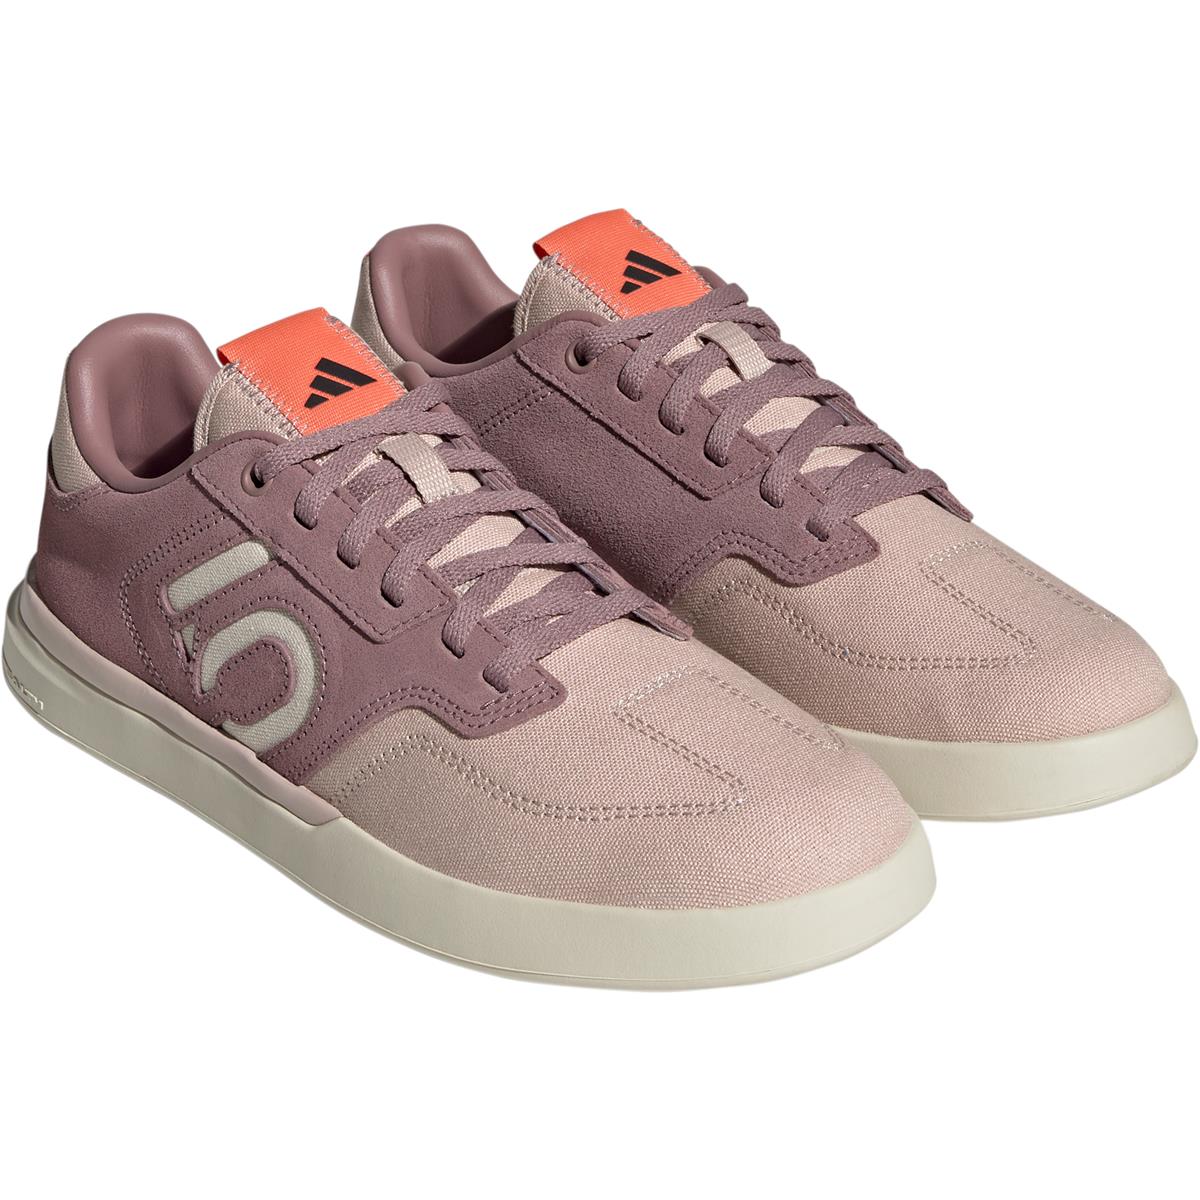 Five Ten Girls Bike Shoes Sleuth Wonder Oxide/Wonder Taupe/Coral Fusion